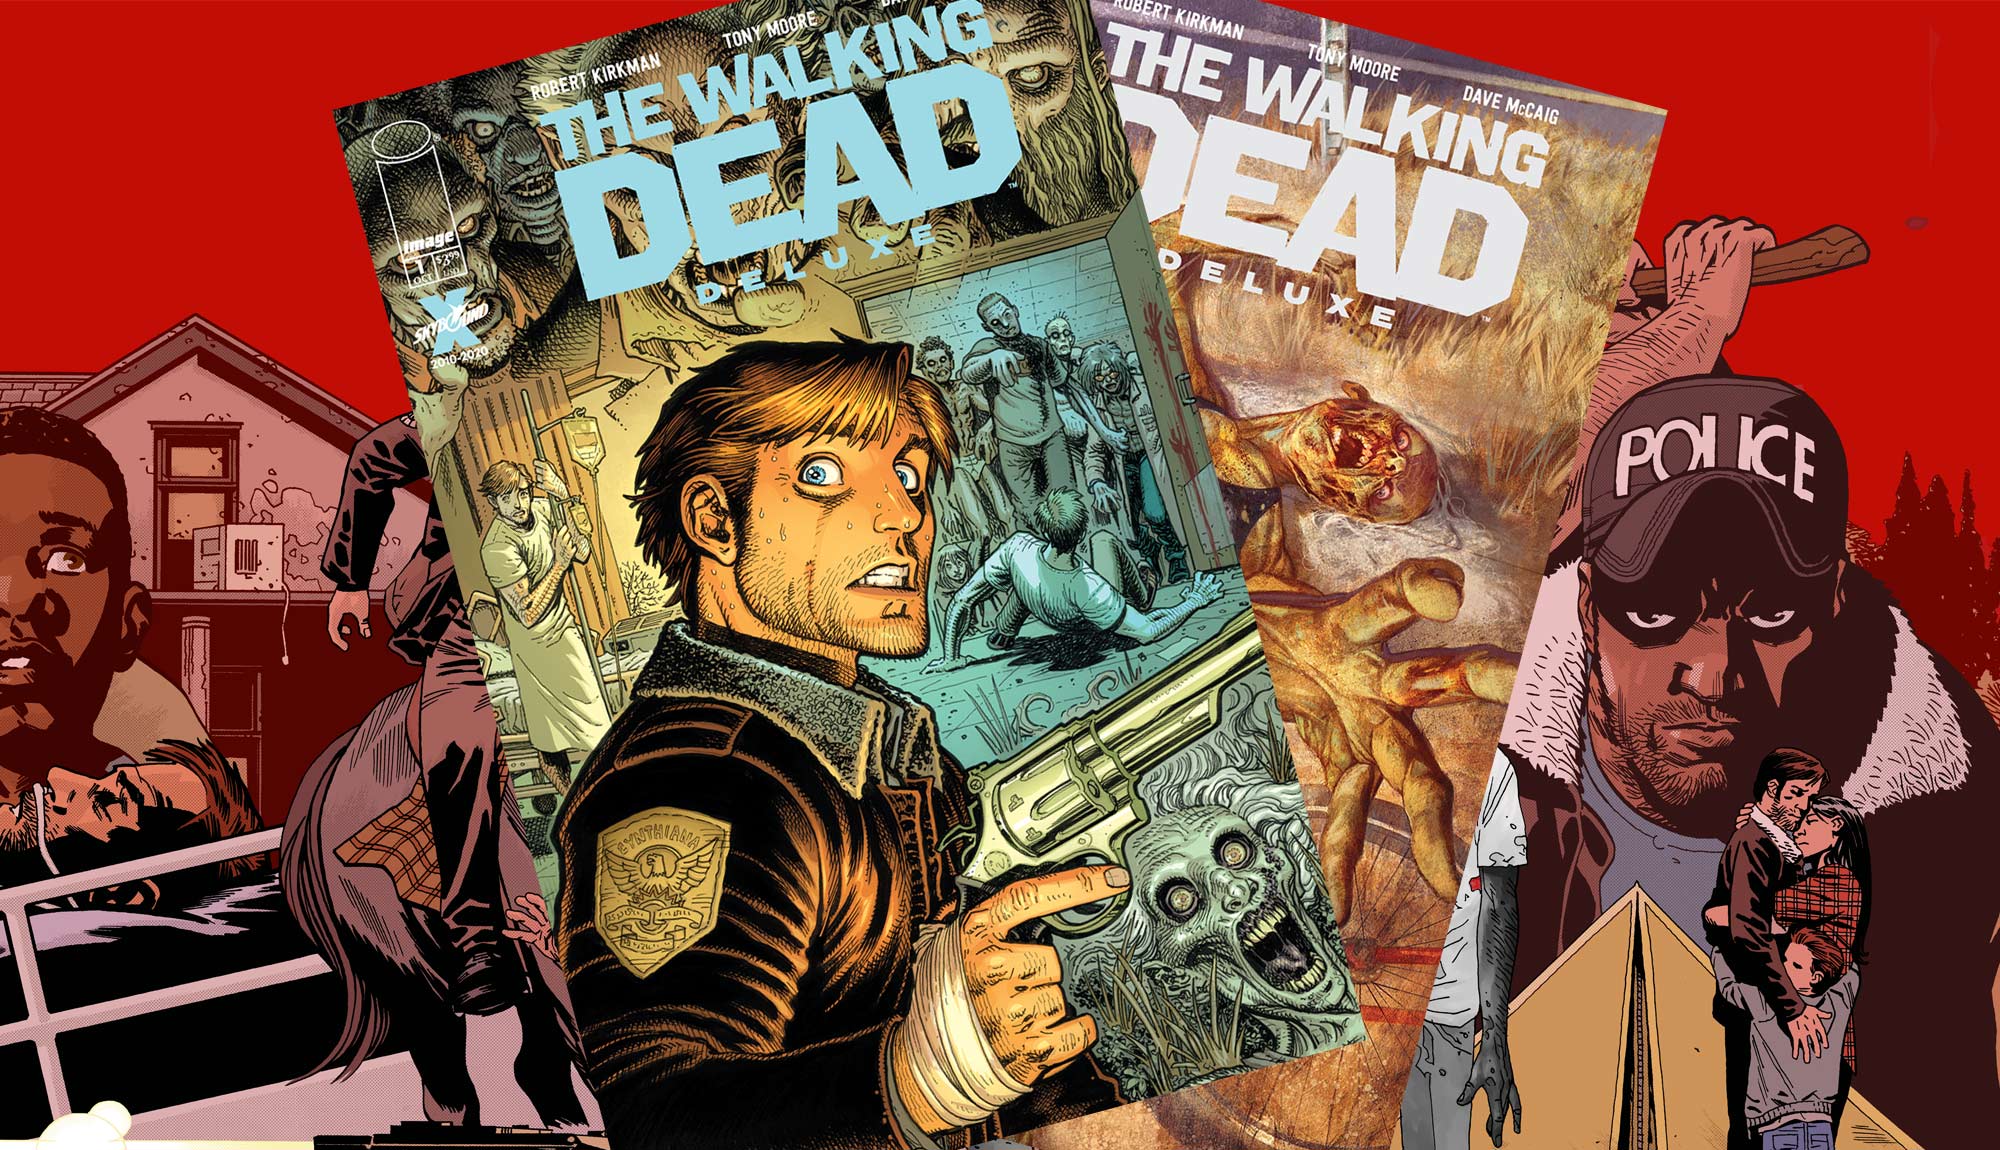 New WALKING DEAD DELUXE #1 Covers Revealed from Adlard, Adams, and Tedesco